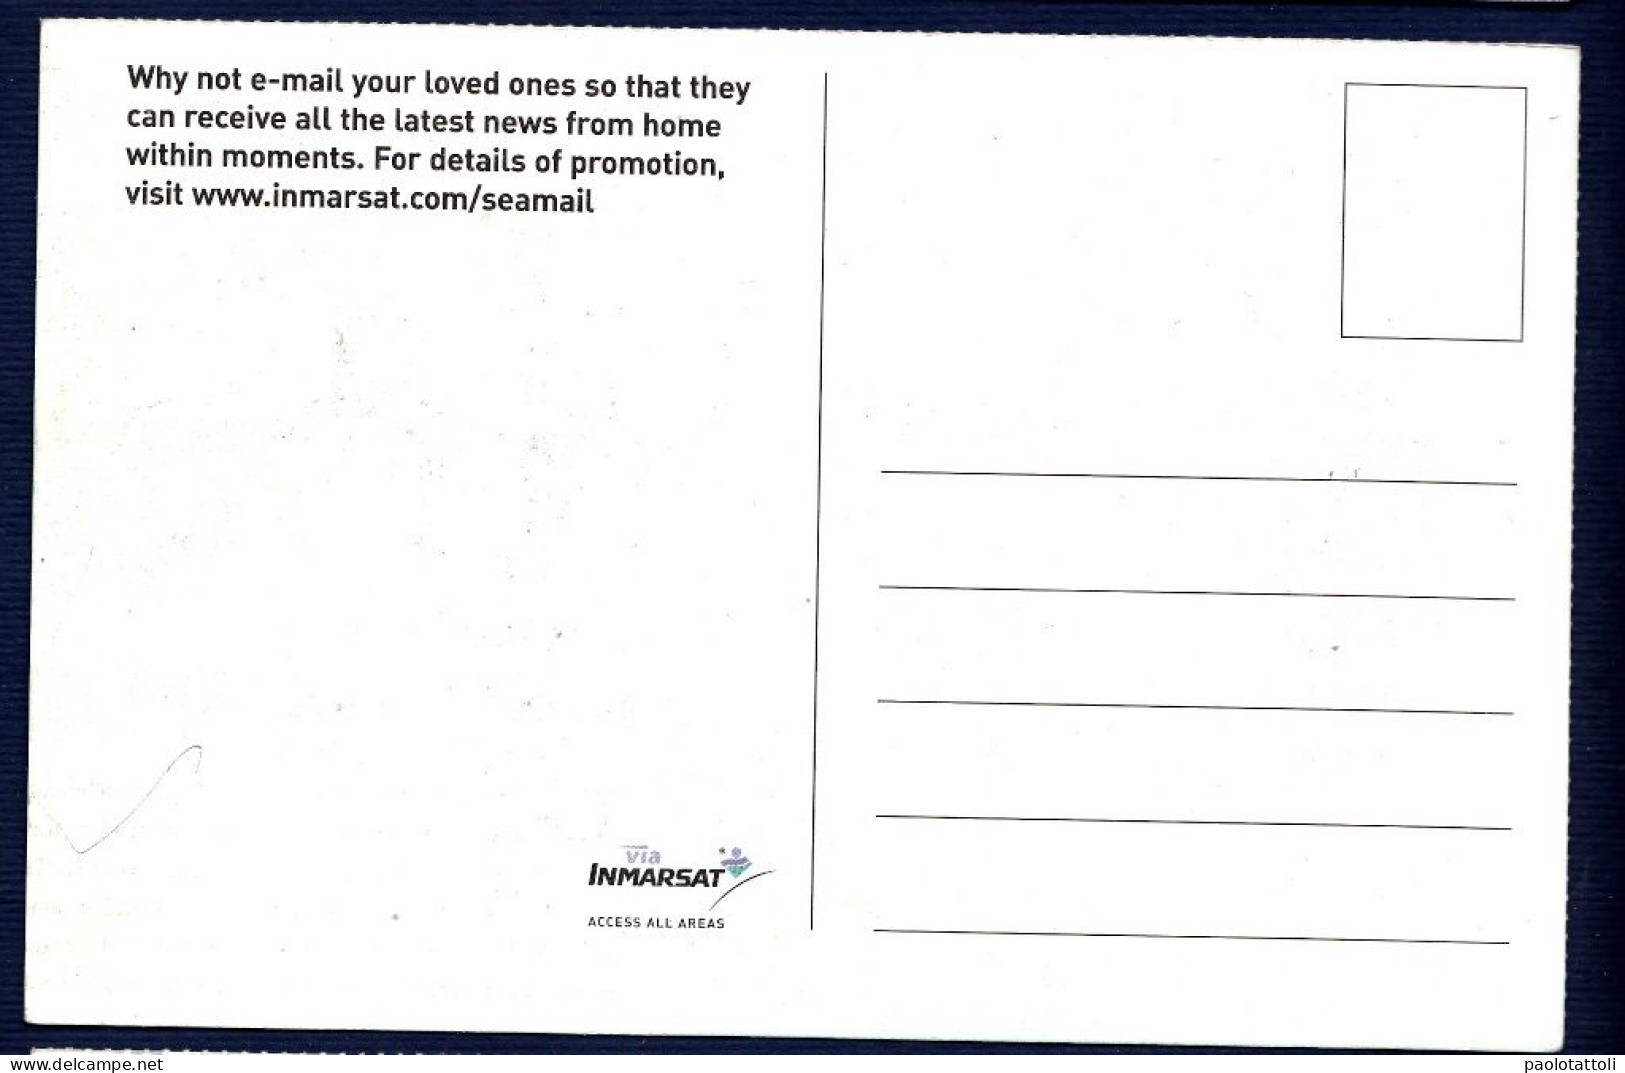 Advertising Post Card- INMARSAT, Love Via Inmarsat. New, Divided Back . SIZE 181mm X150mm. - Other & Unclassified